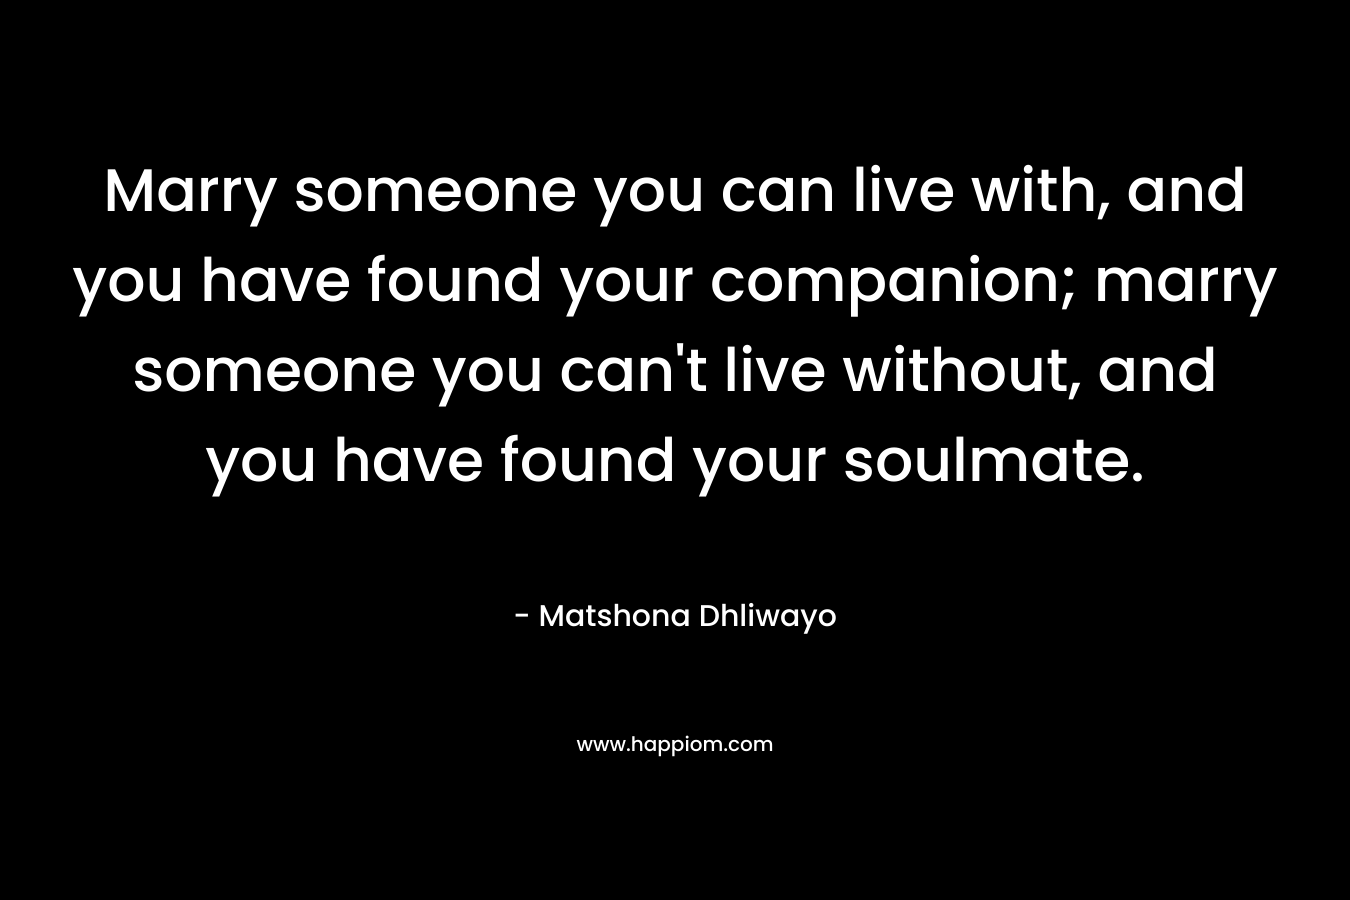 Marry someone you can live with, and you have found your companion; marry someone you can't live without, and you have found your soulmate.